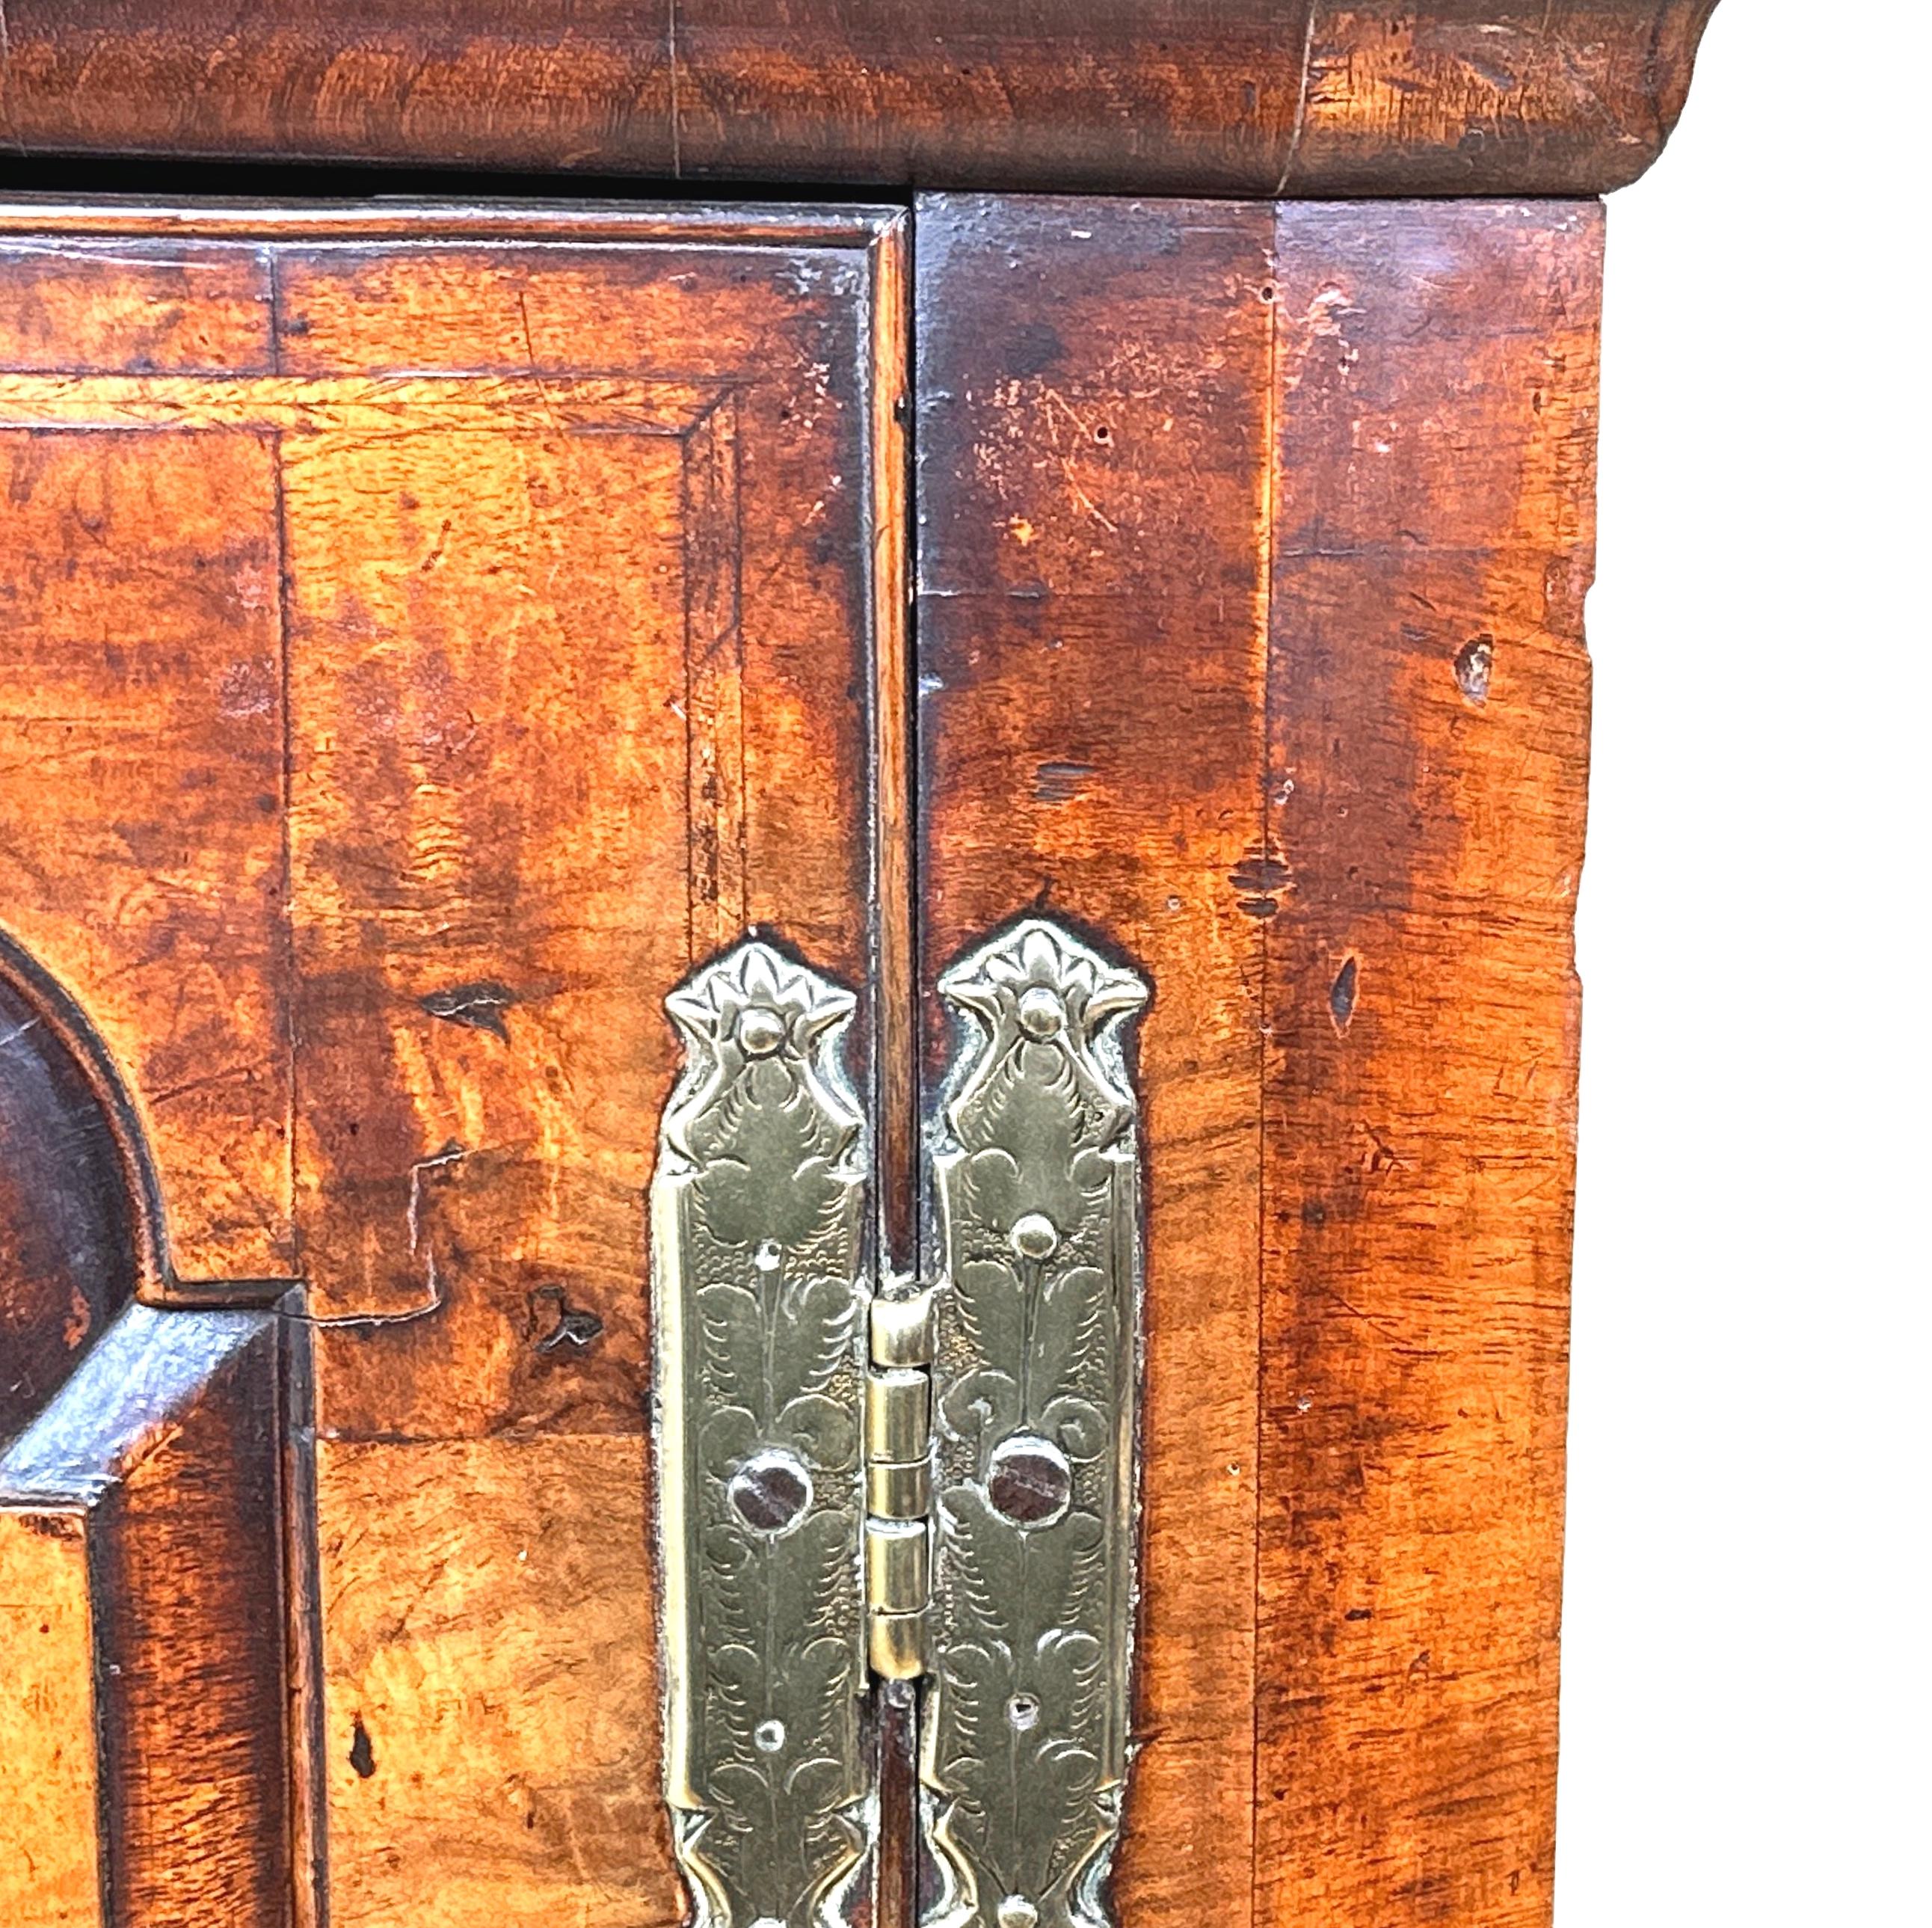 An Extremely Attractive And Very Good Quality Early 18th Century, Queen Anne Period, Walnut Wall Hanging Corner Cupboard, Of Exceptional Untouched Colour And Patina, Having Elegant Fielded Panel Door, With Original Brasswear Enclosing Shaped